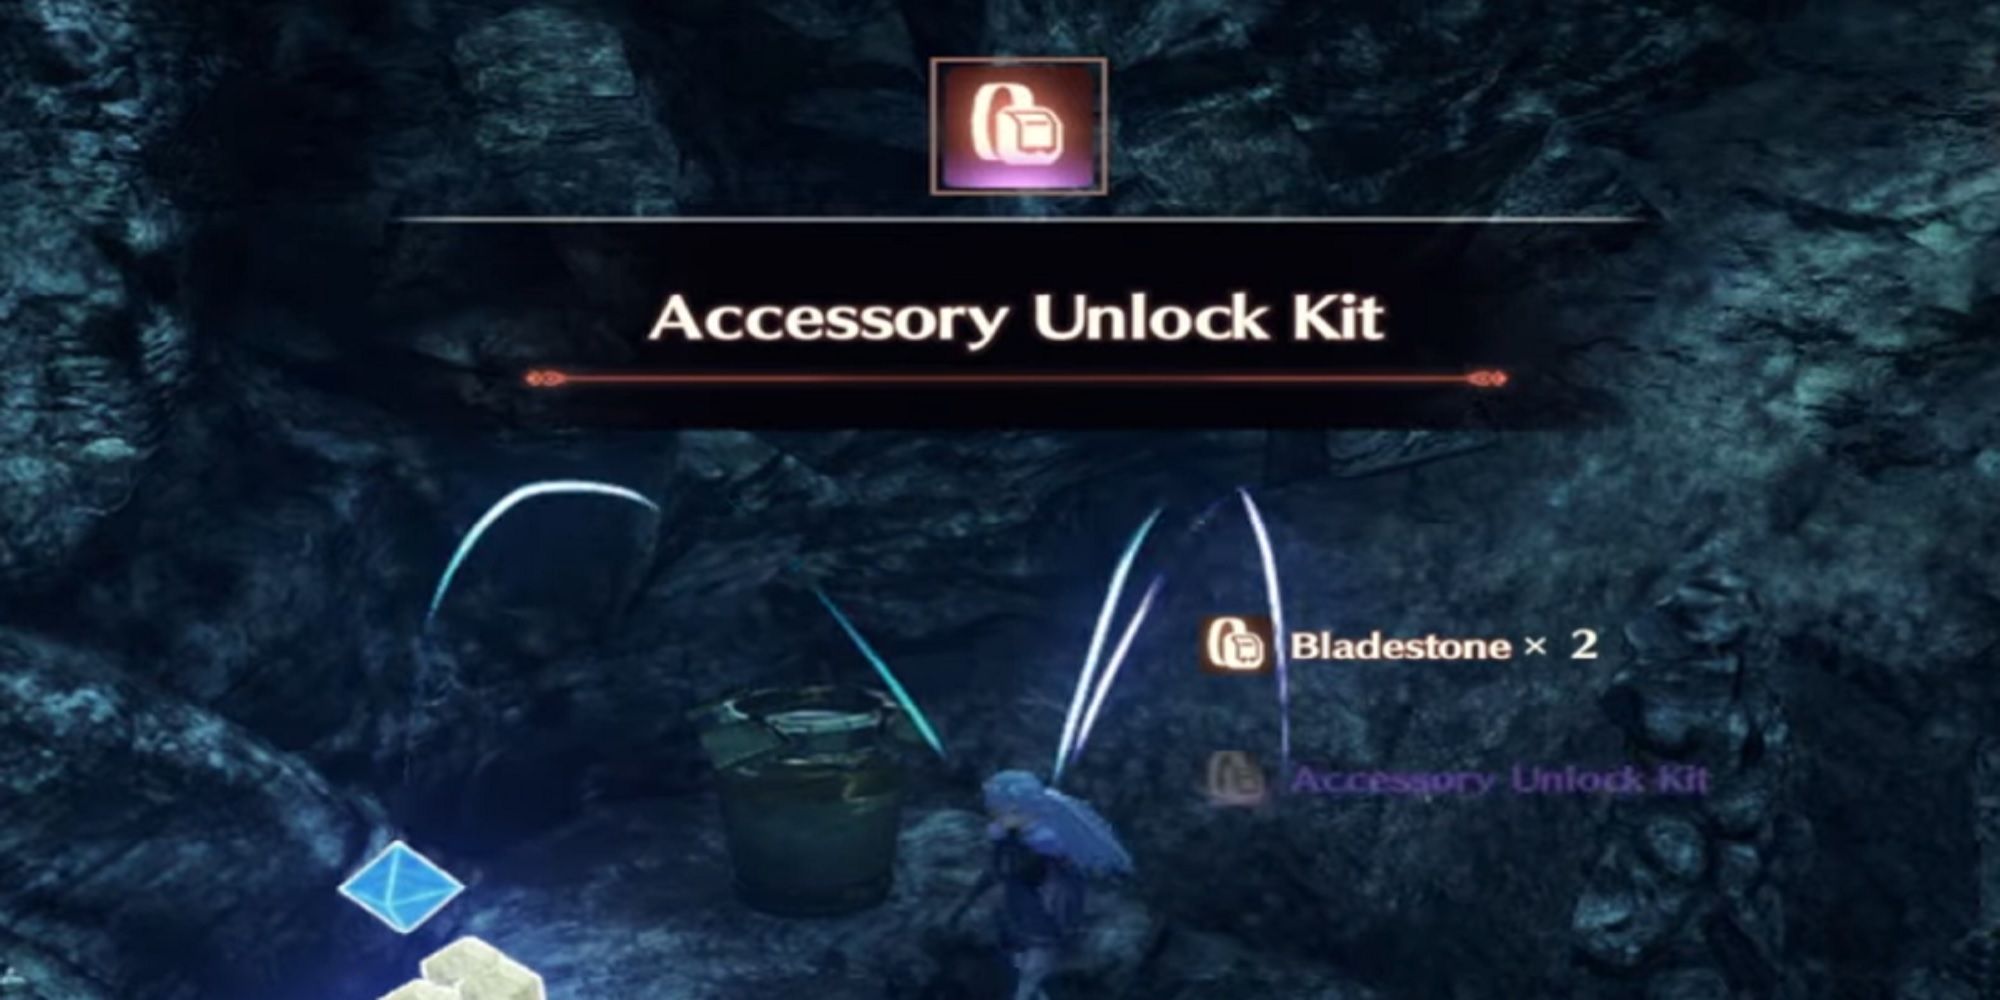 Xenoblade Chronicles 3 - Future Redeemed party opens chest including Accessory Unlock Kit 